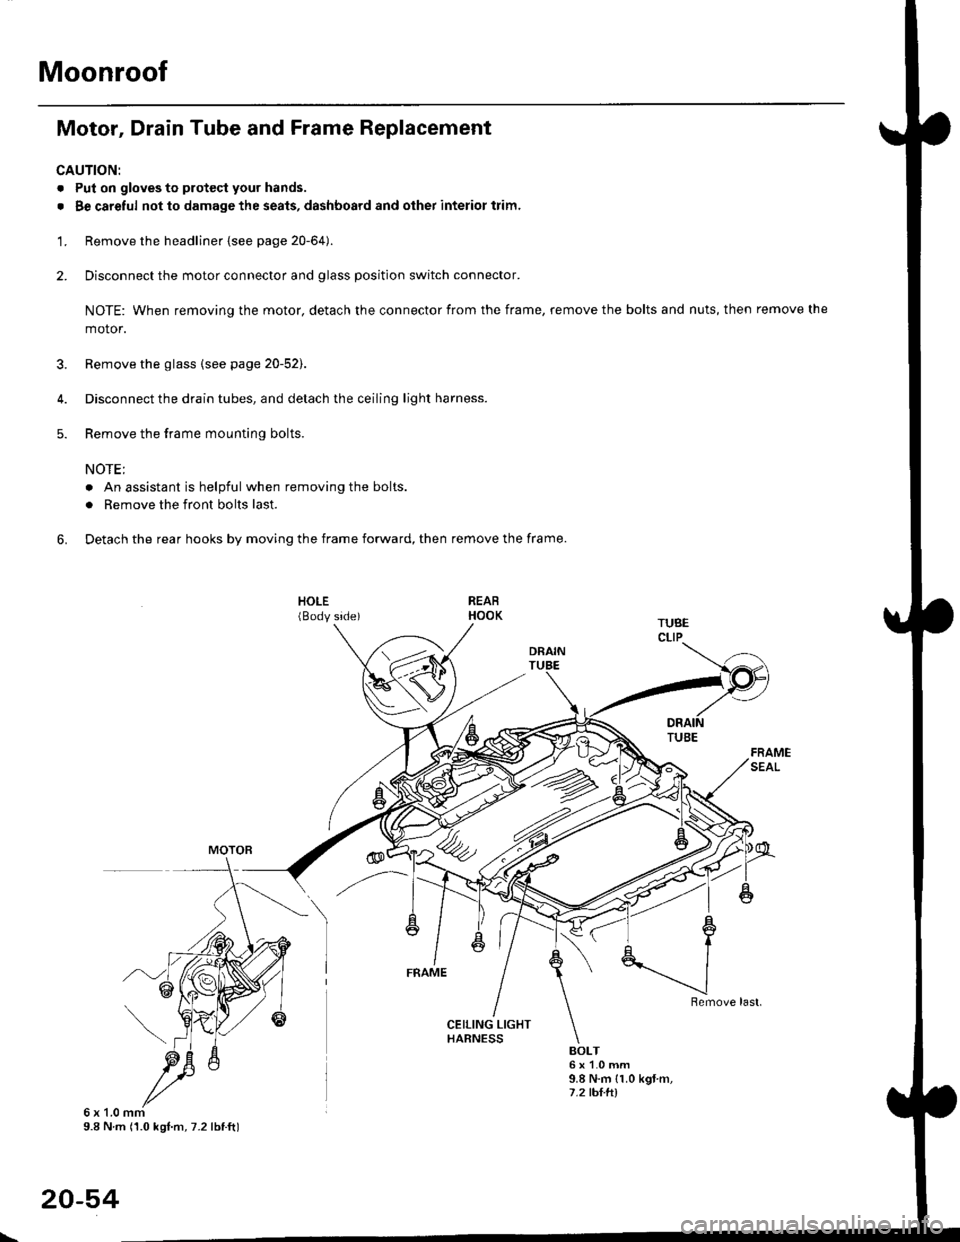 HONDA CIVIC 2000 6.G Workshop Manual Moonroof
Motor, Drain Tube and Frame Replacement
CAUTION:
. Put on gloves to protecl your hands.
. Be careful not to damage the seats, dashboard and other interior trim.
1. Remove the headliner {see 